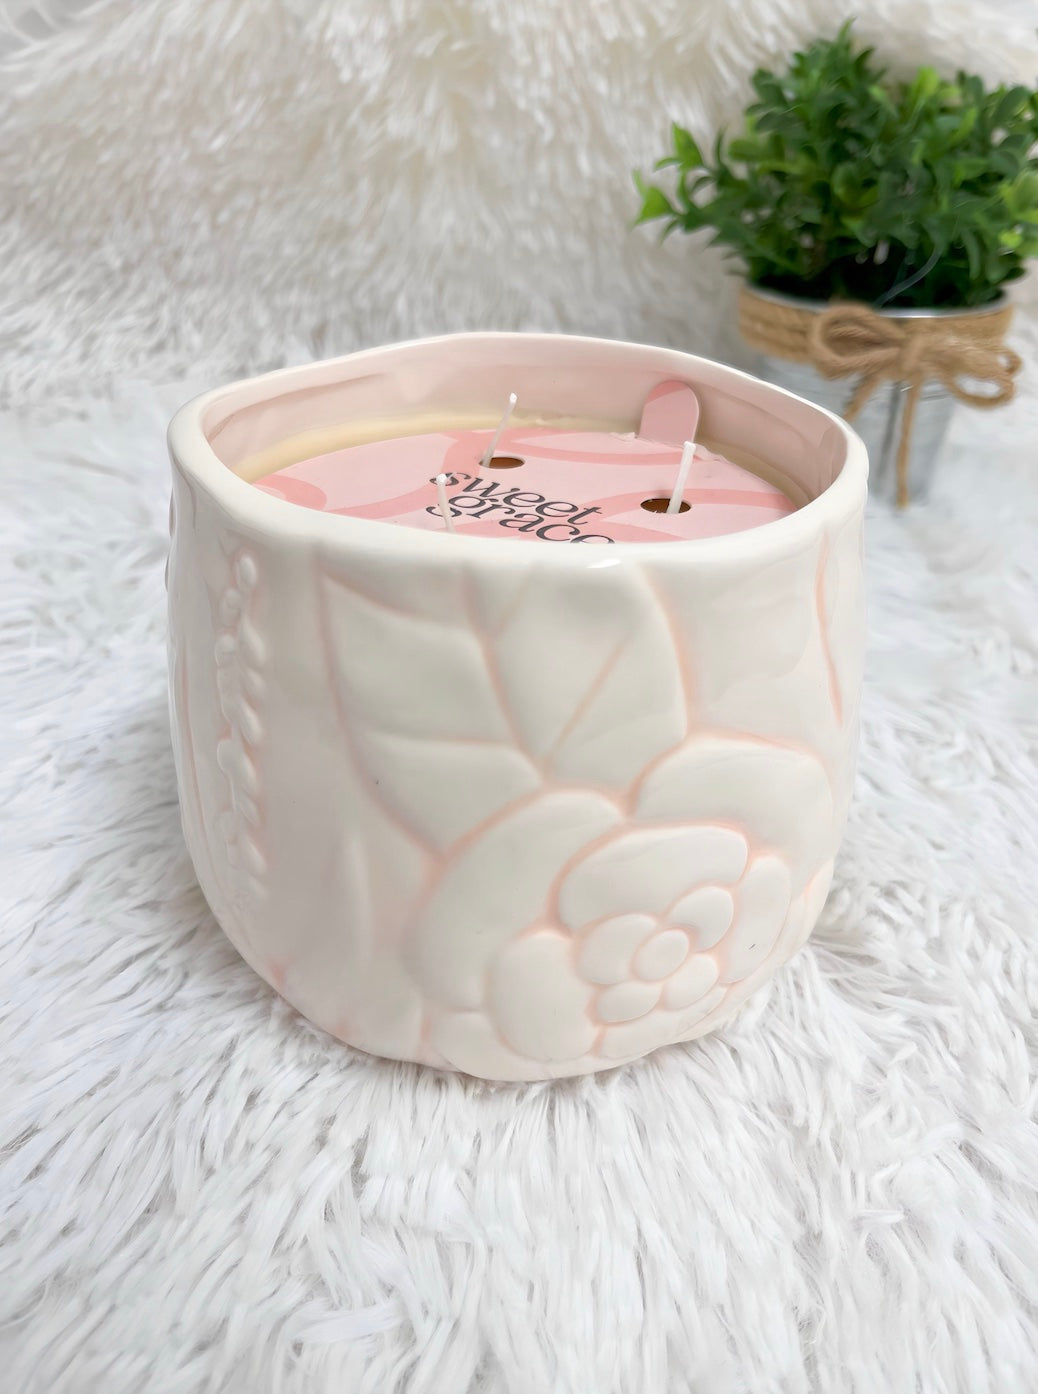 Our Favorite Jar Sweet Grace Candle